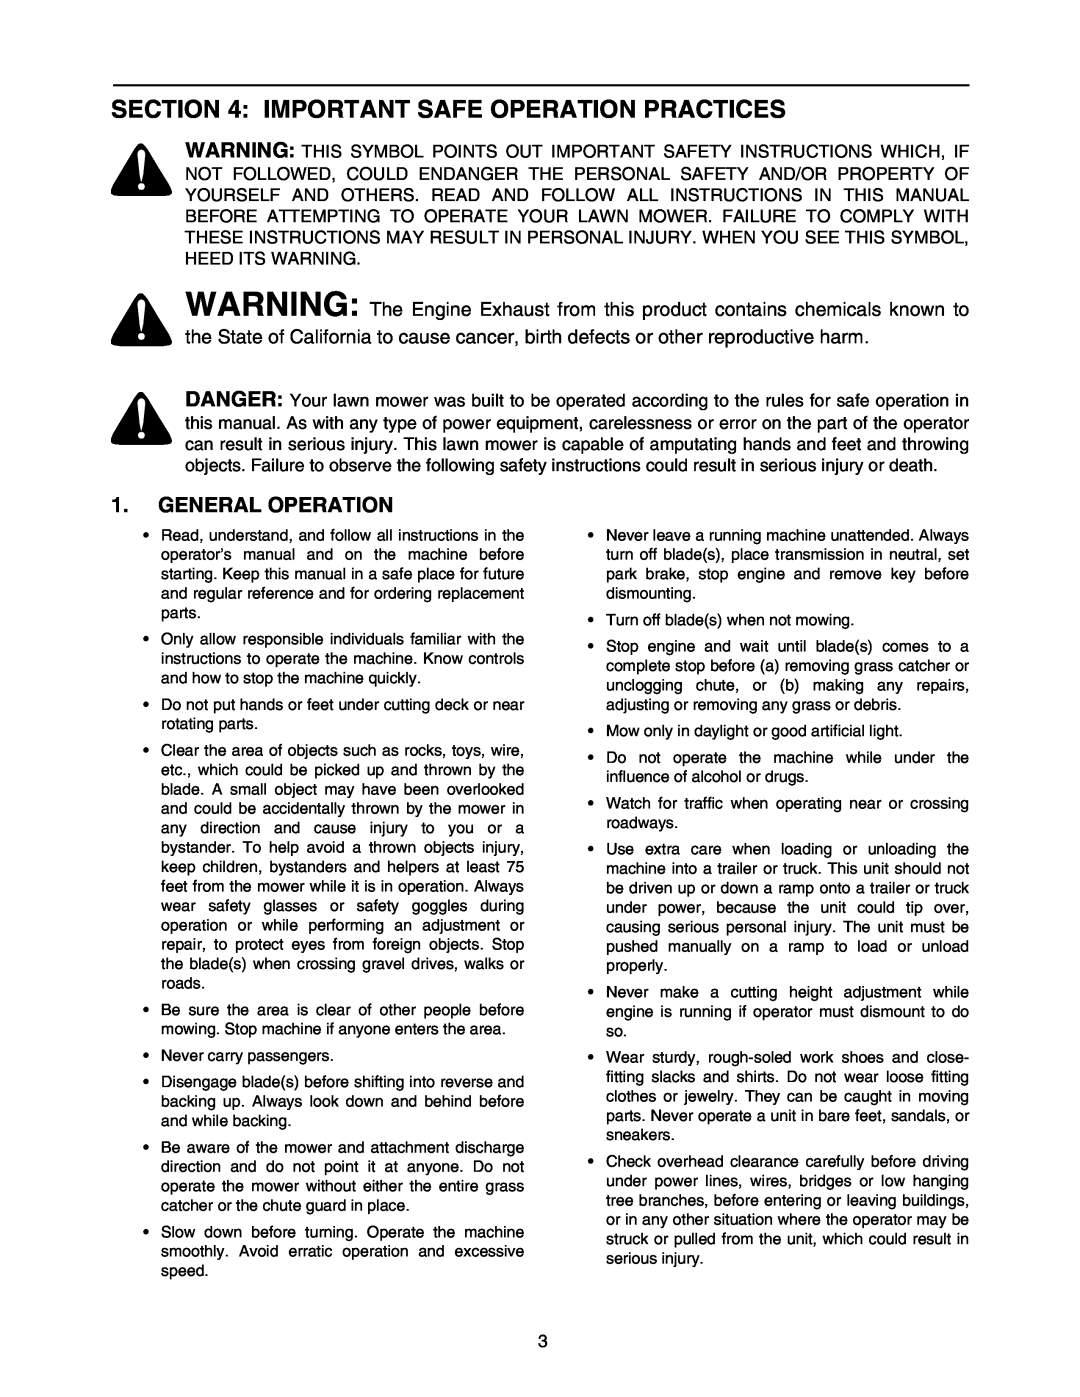 MTD 604 manual Important Safe Operation Practices, General Operation 